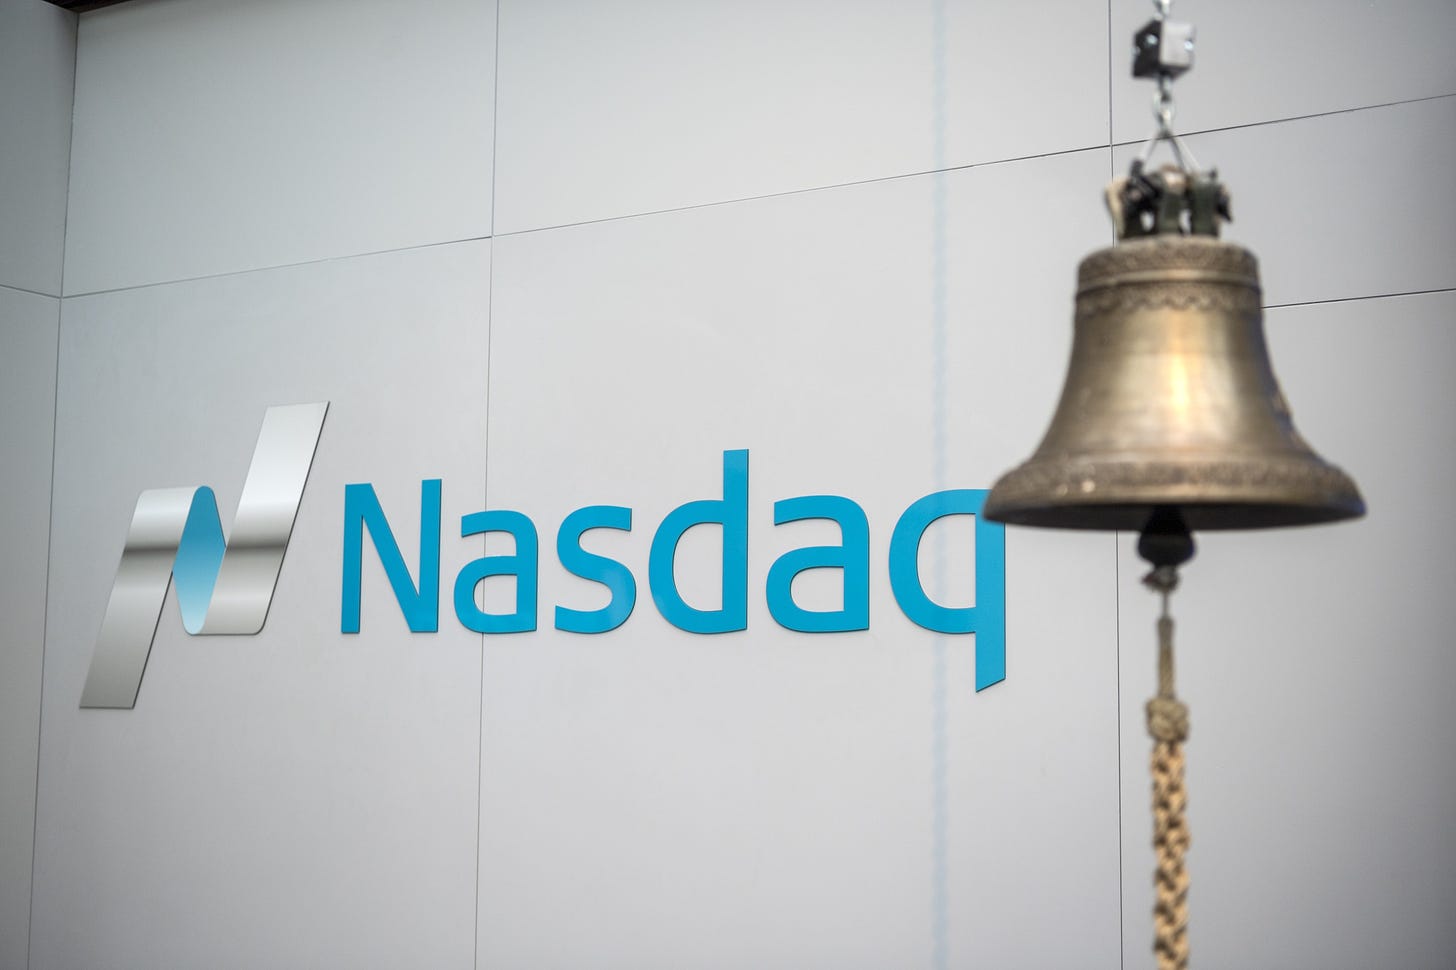 A trading bell hangs in front of Nasdaq signage.&nbsp;